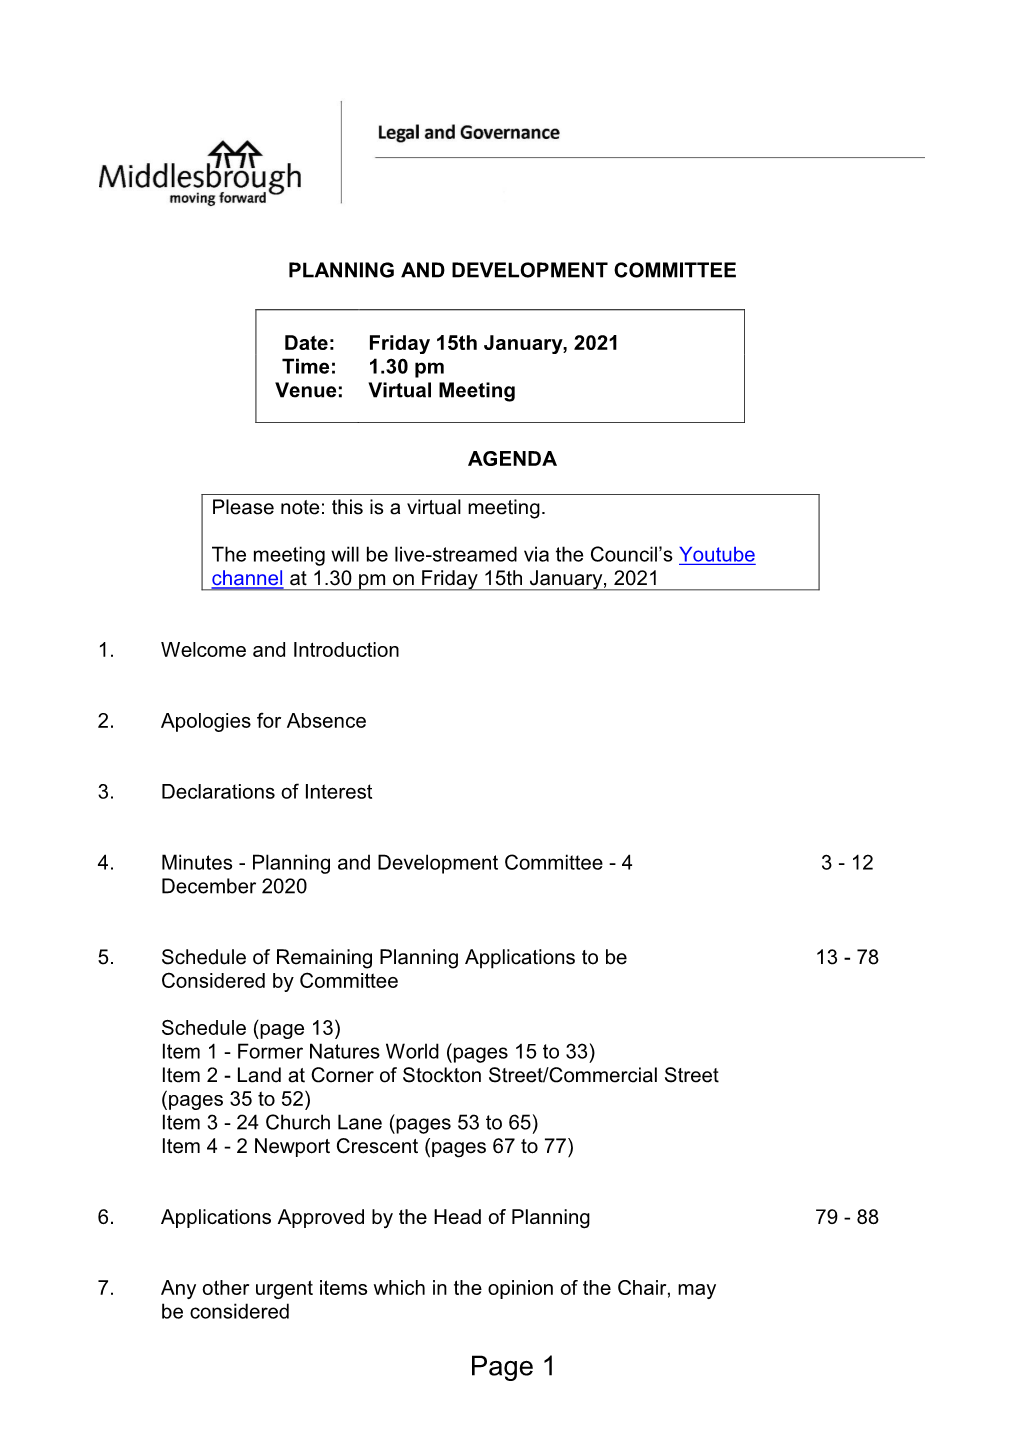 (Public Pack)Agenda Document for Planning and Development Committee, 15/01/2021 13:30